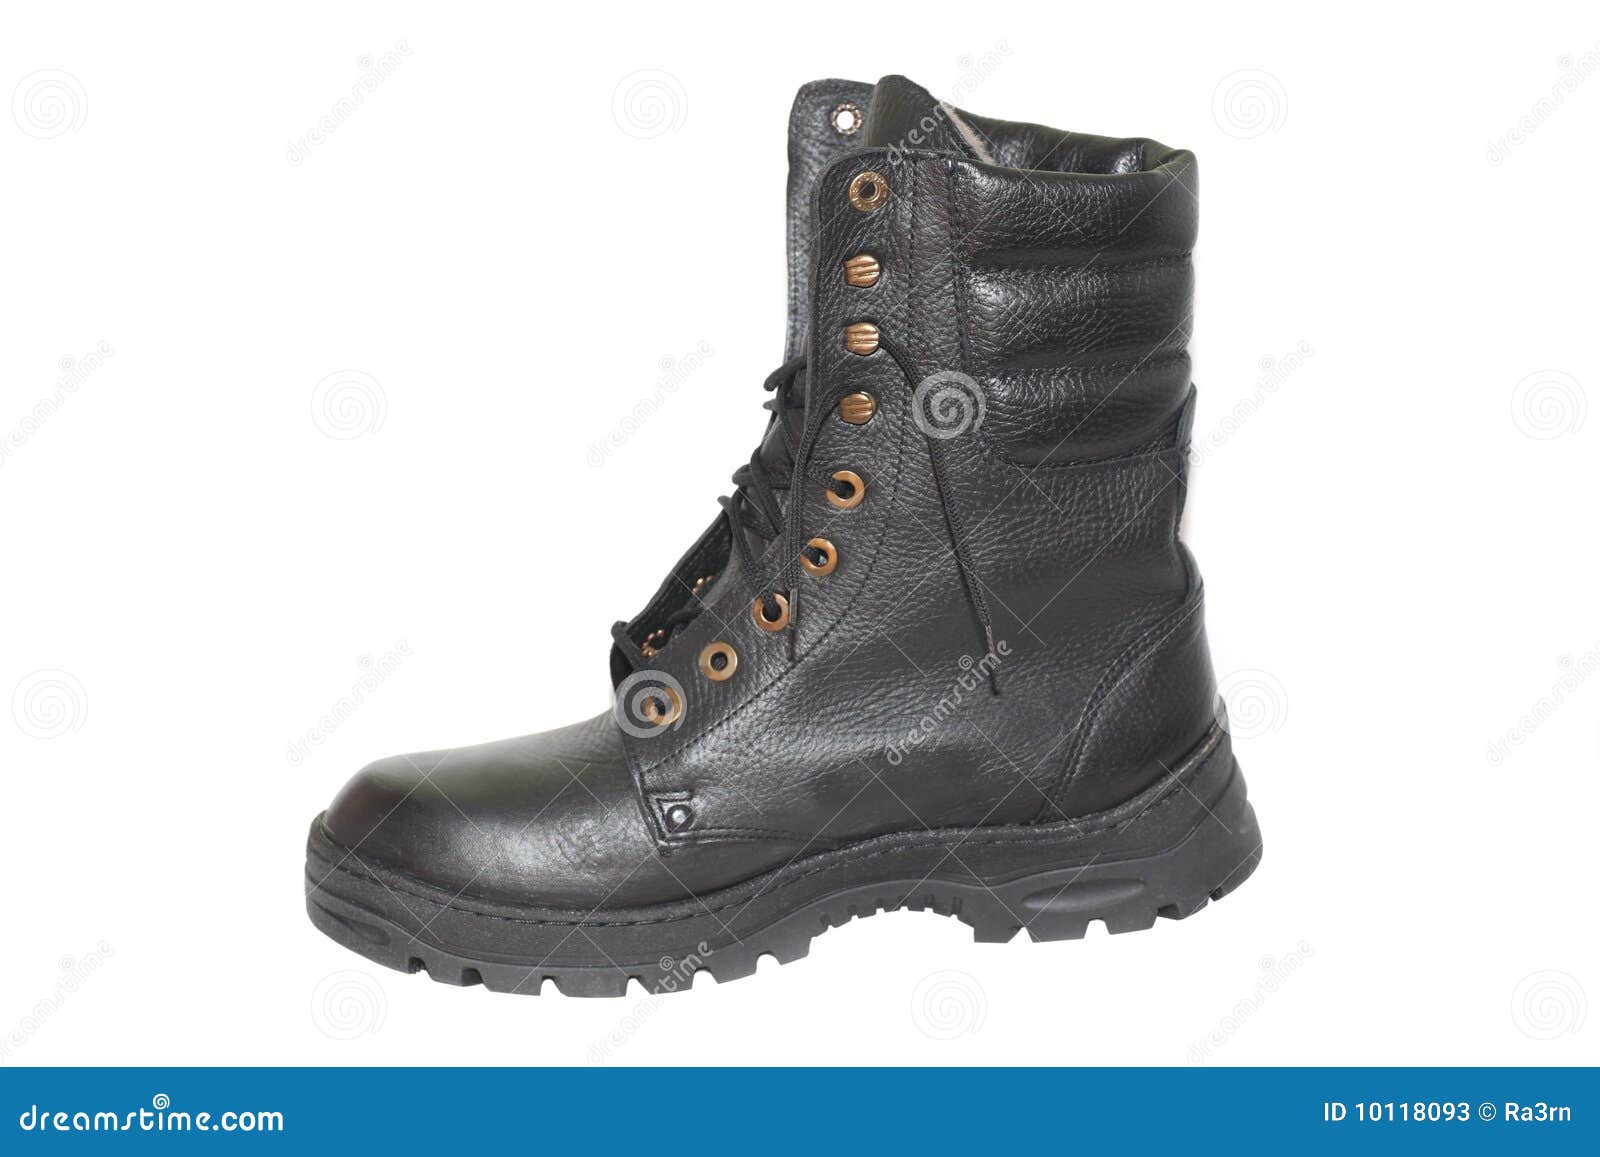 Army boots stock image. Image of closeup, people, shoes - 10118093